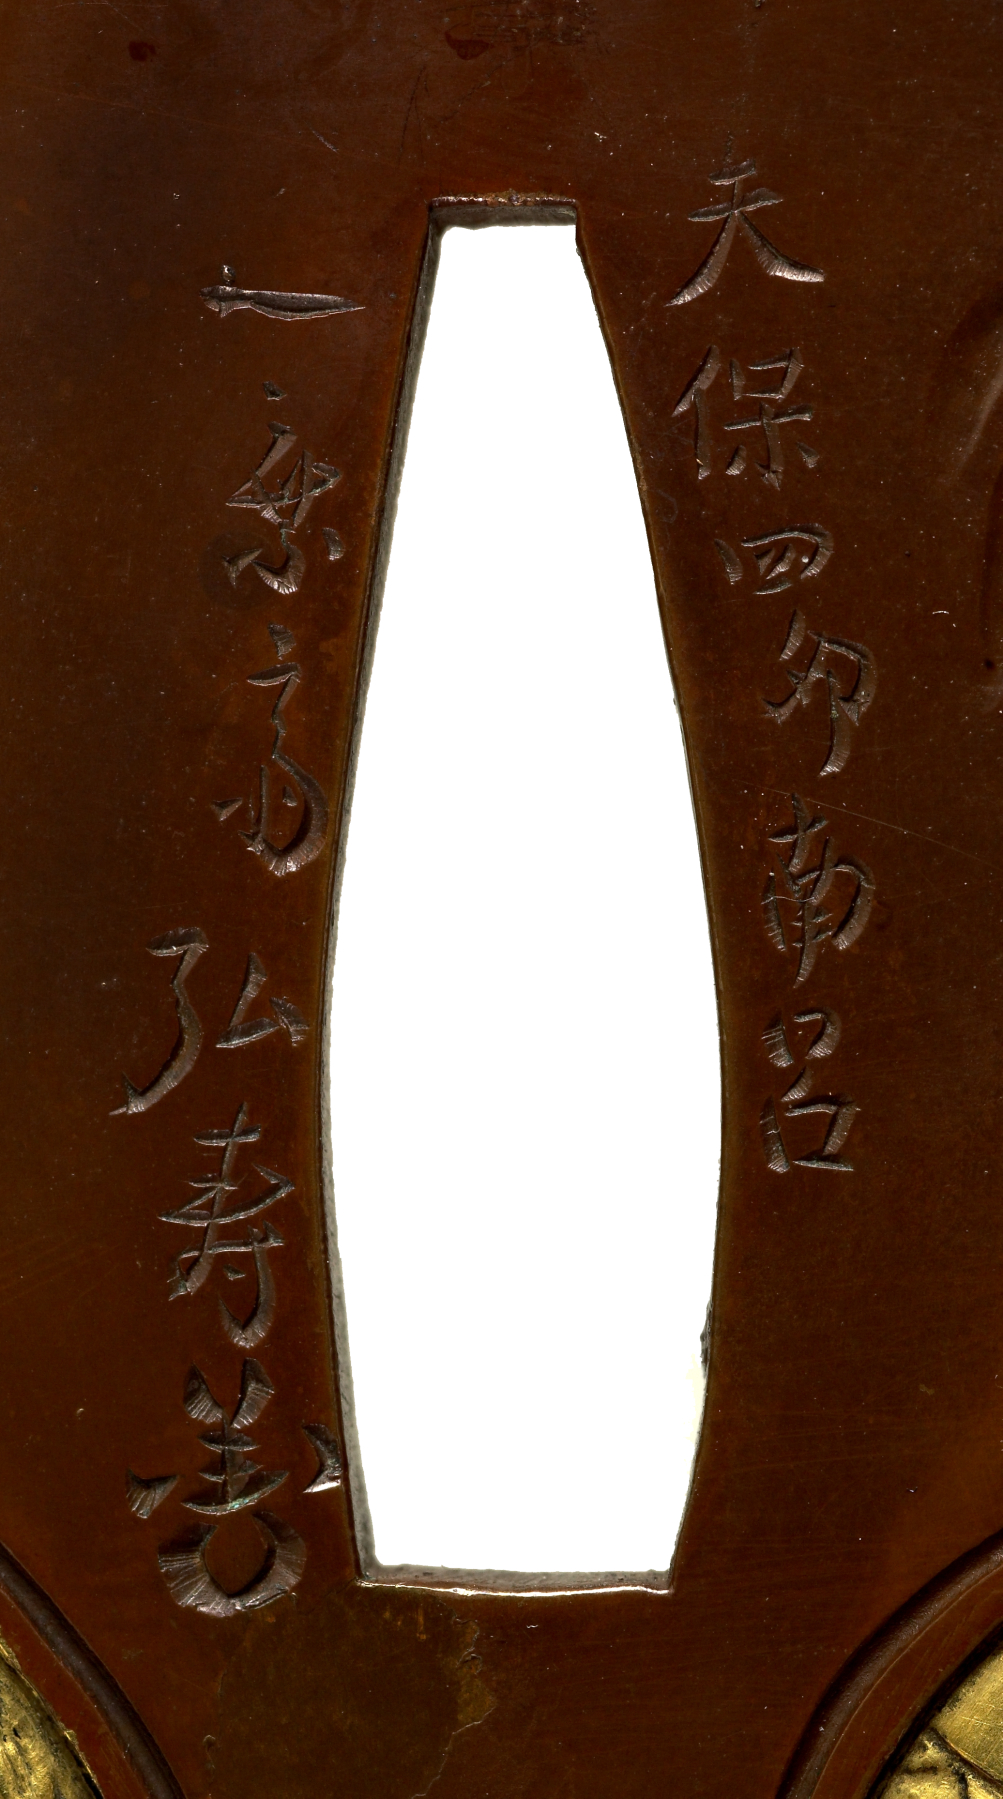 Image for Tsuba with a Fox in Buddhist Robes Inside a Gong ("Mokugyo")